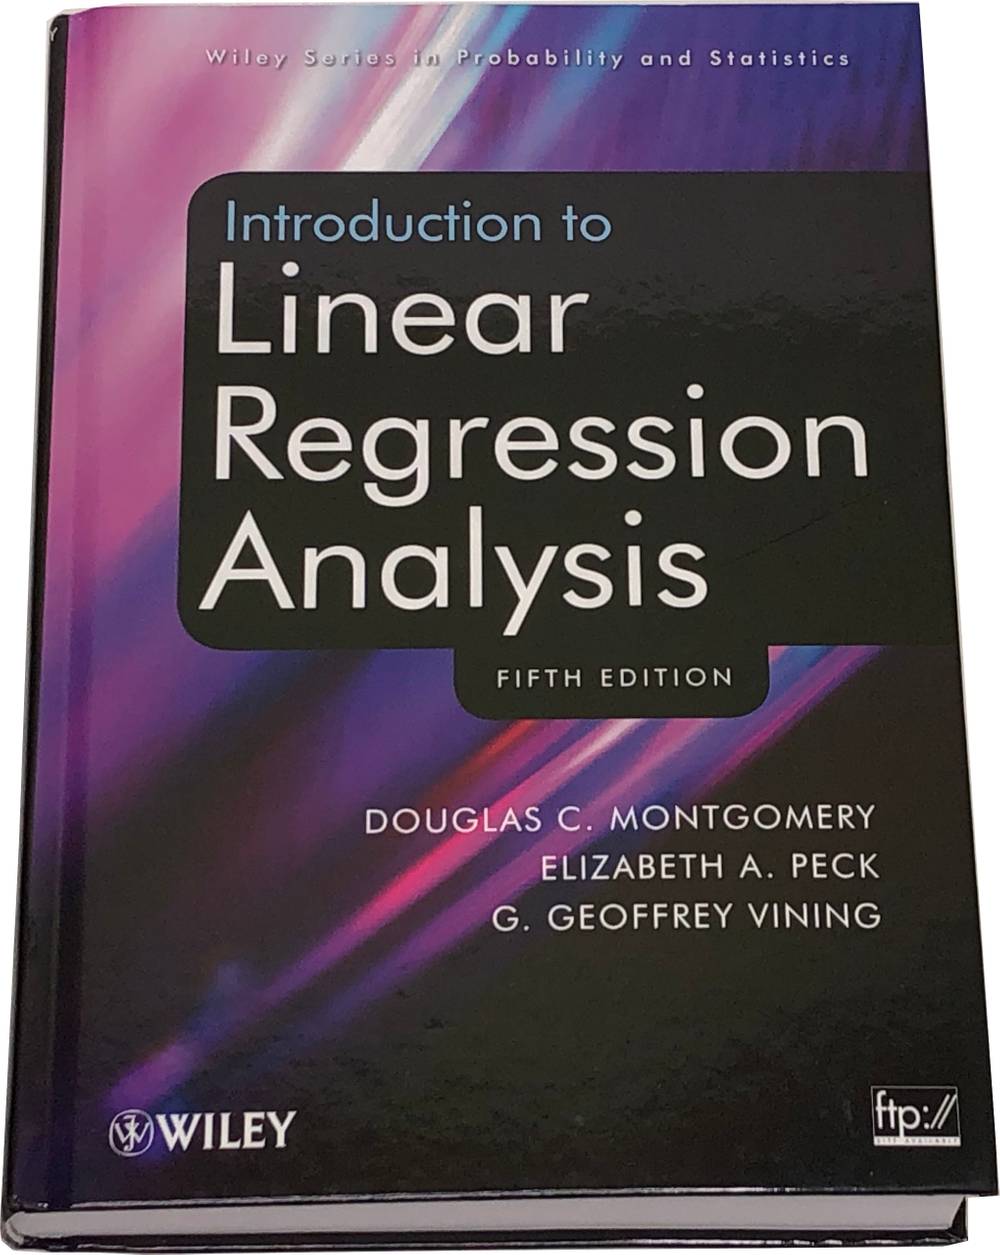 Book image of Introduction to Linear Regression Analysis.